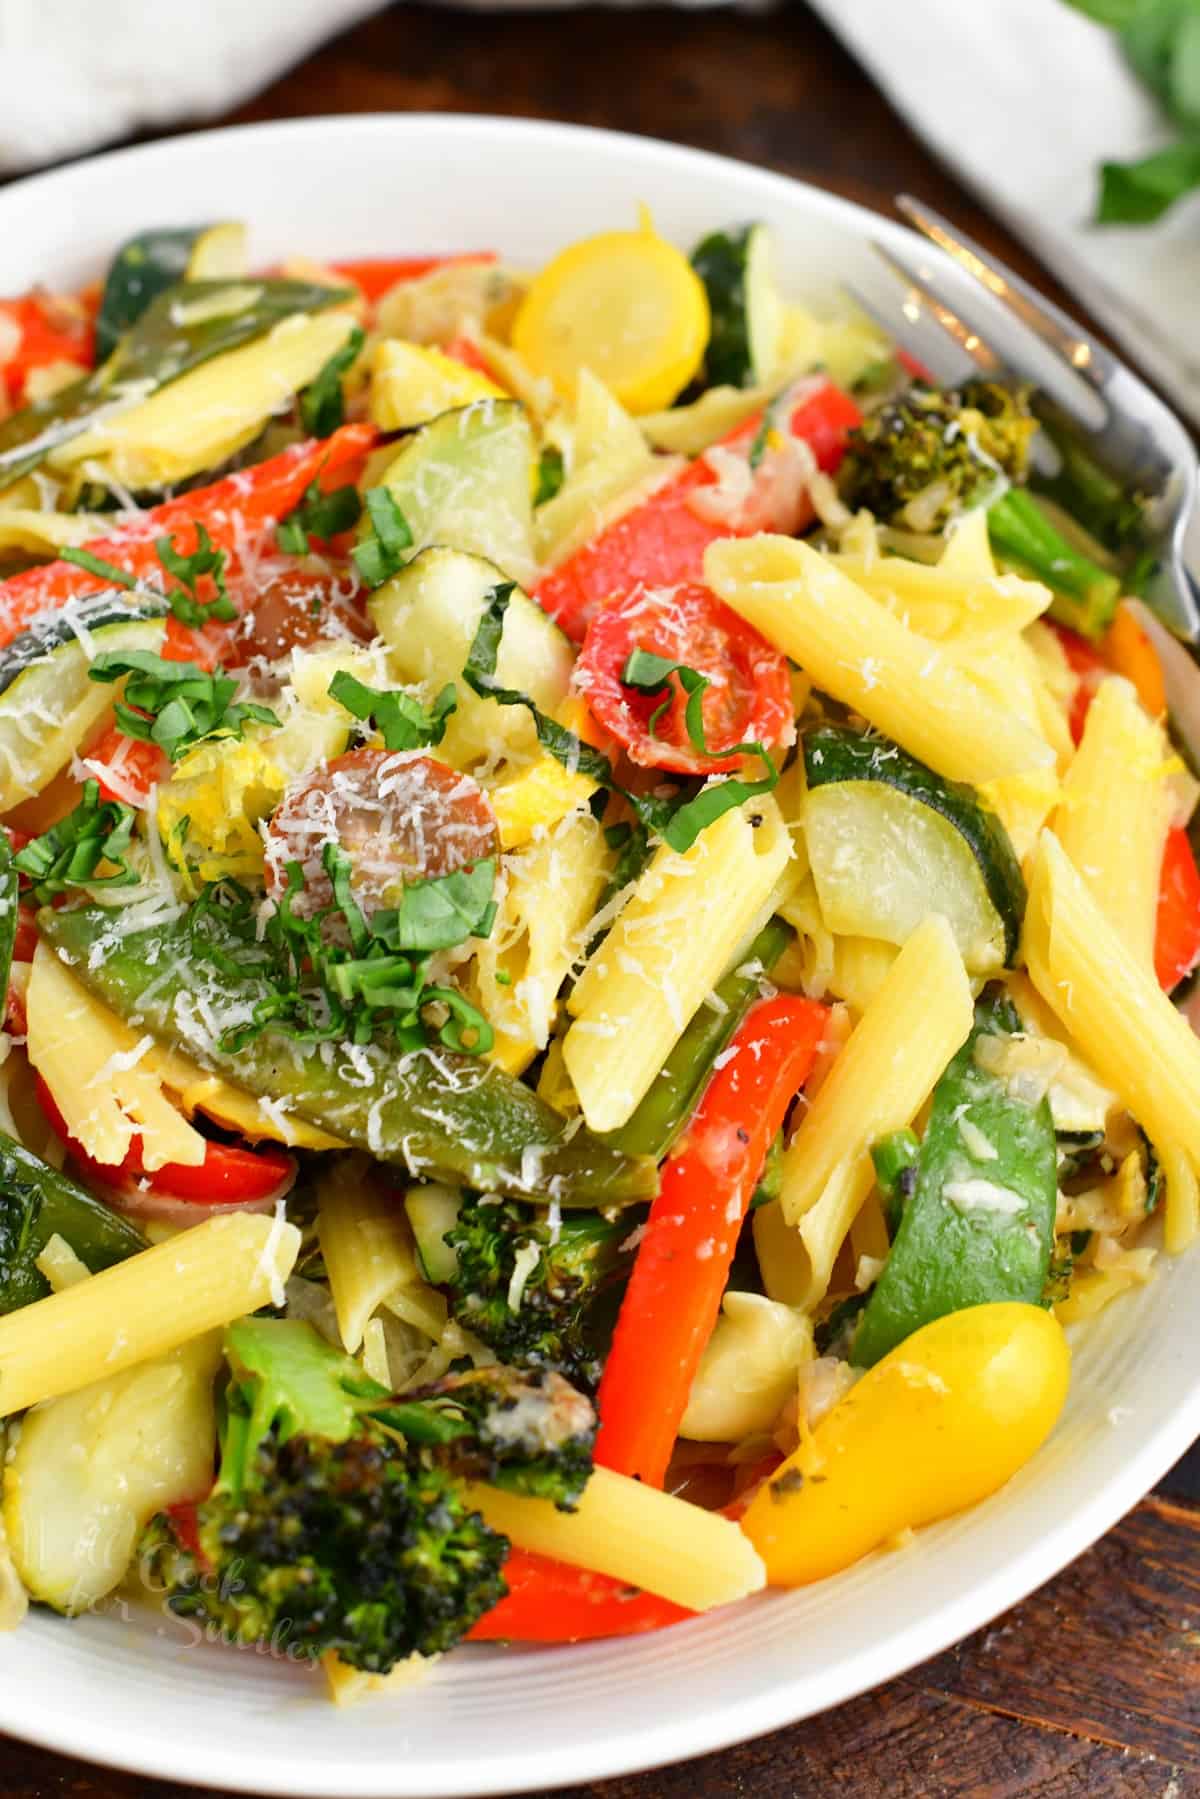 A white plate contains a large portion of pasta primavera. 